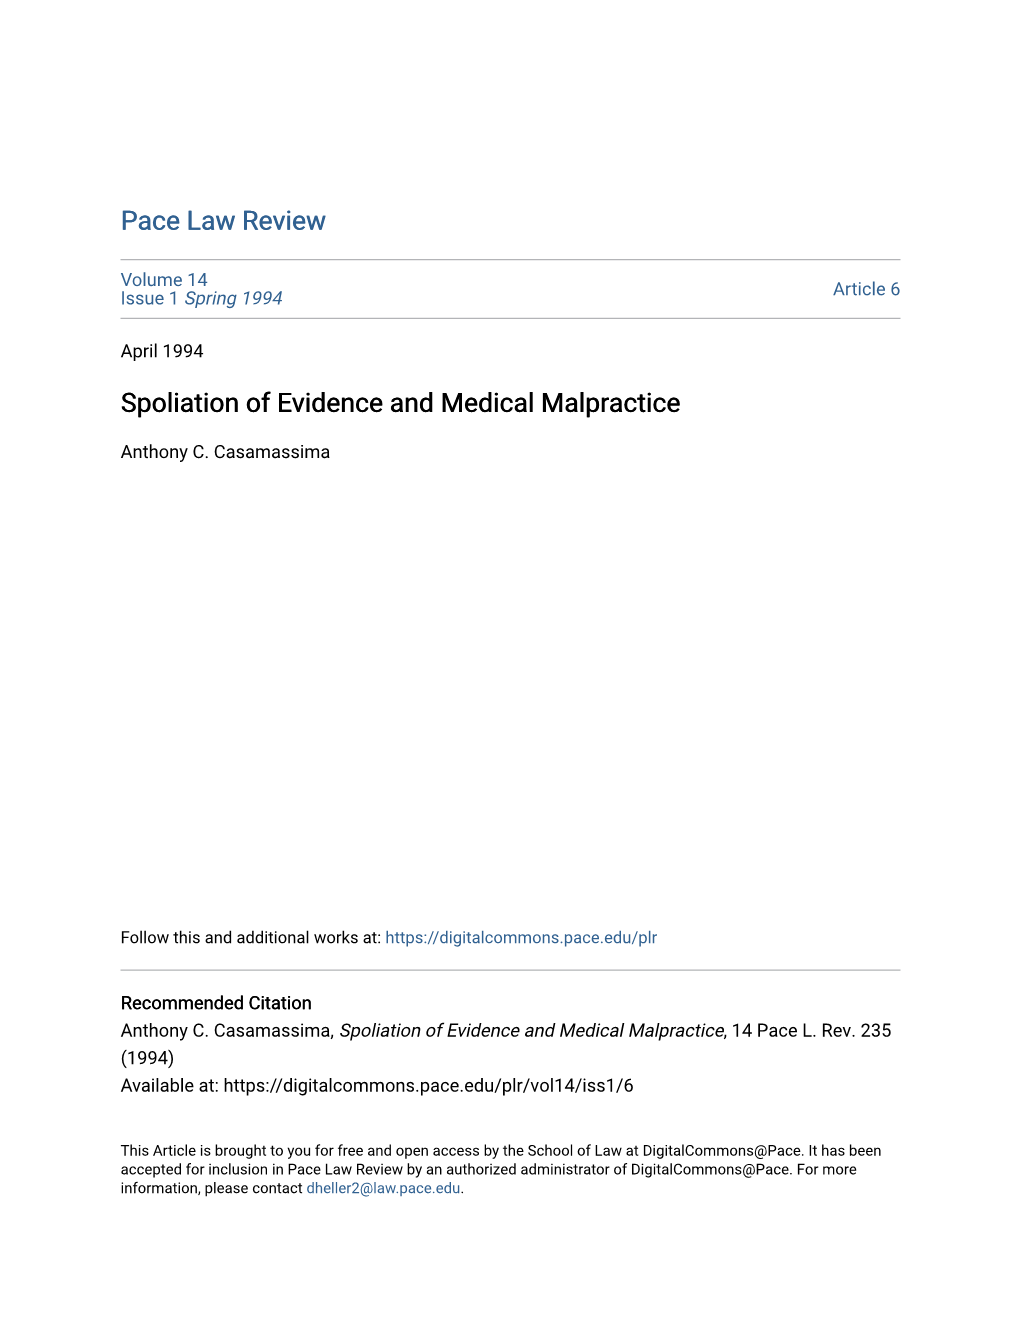 Spoliation of Evidence and Medical Malpractice